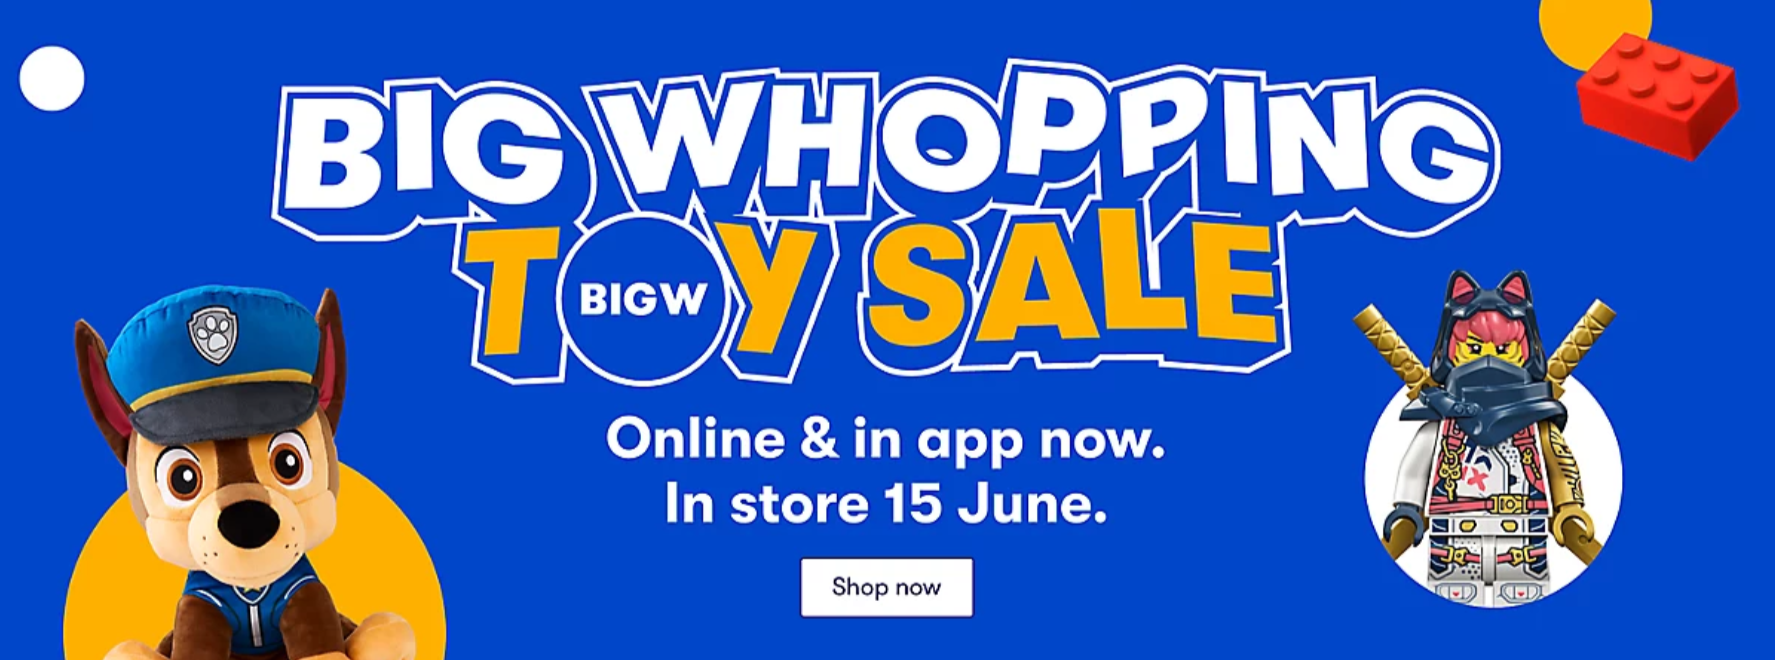 Big Whopping Toy Sale Live Now Online (In store June 15th)